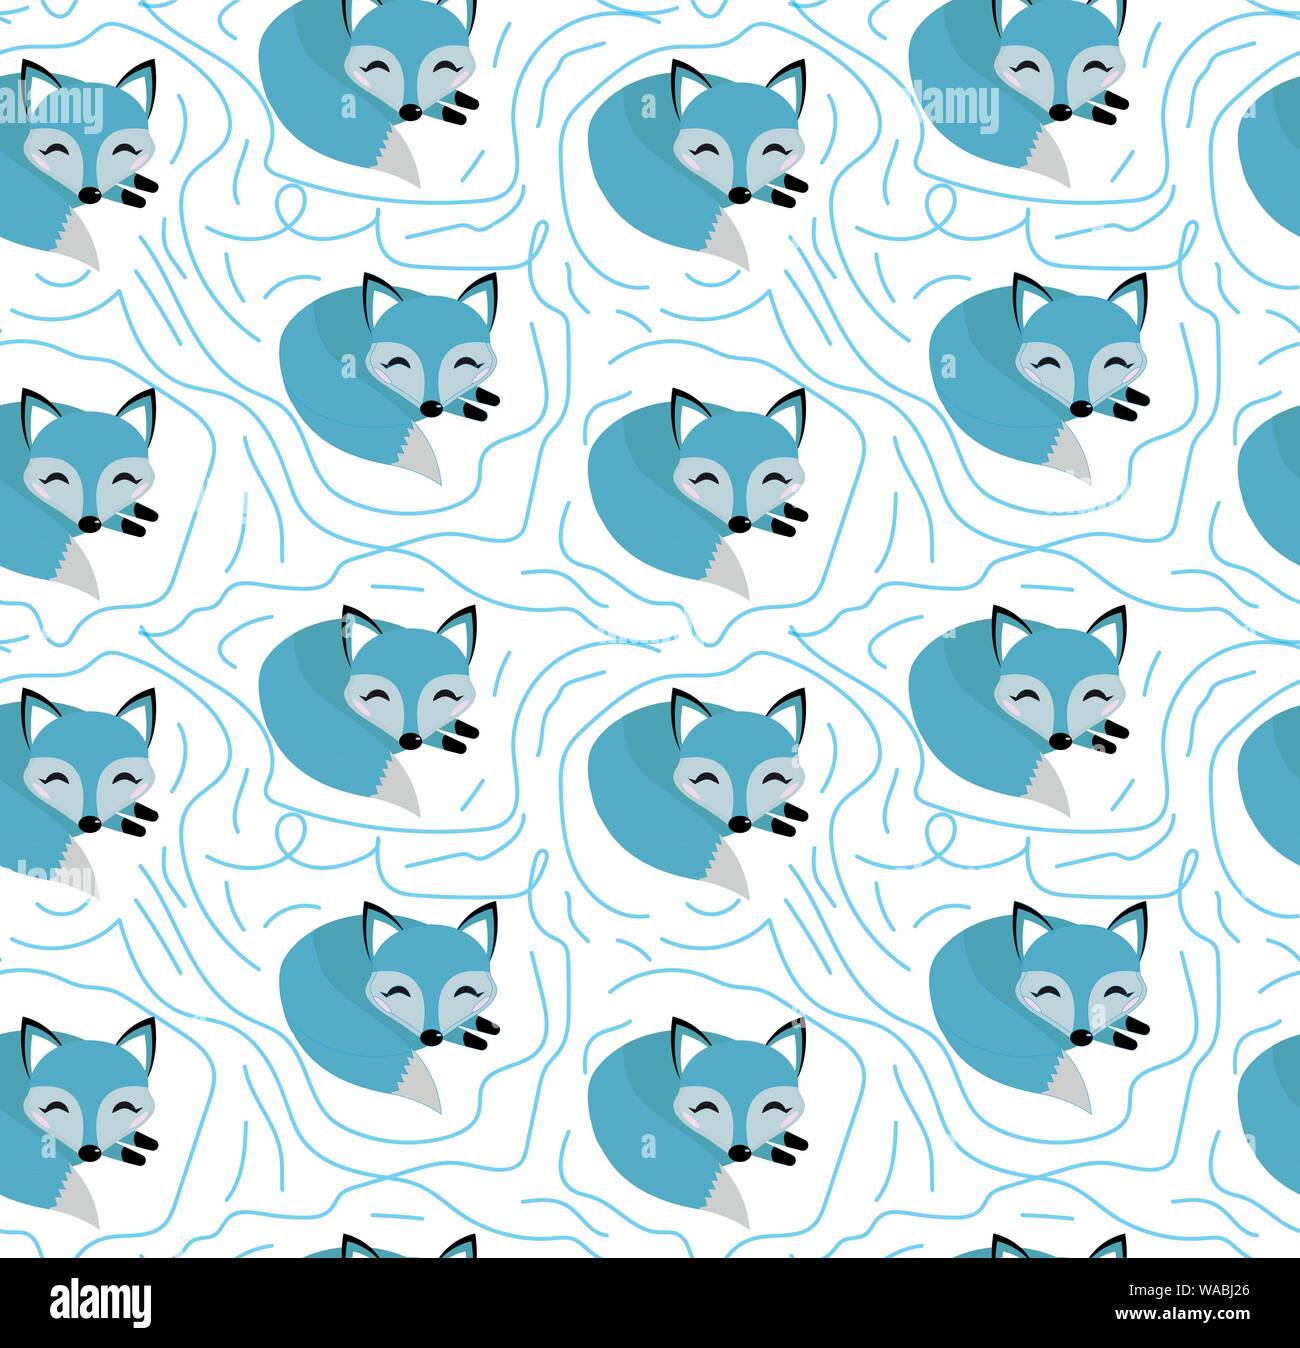 Blue fox seamless pattern. Kids, Baby endless background, repeating texture. Vector illustration. Stock Vector